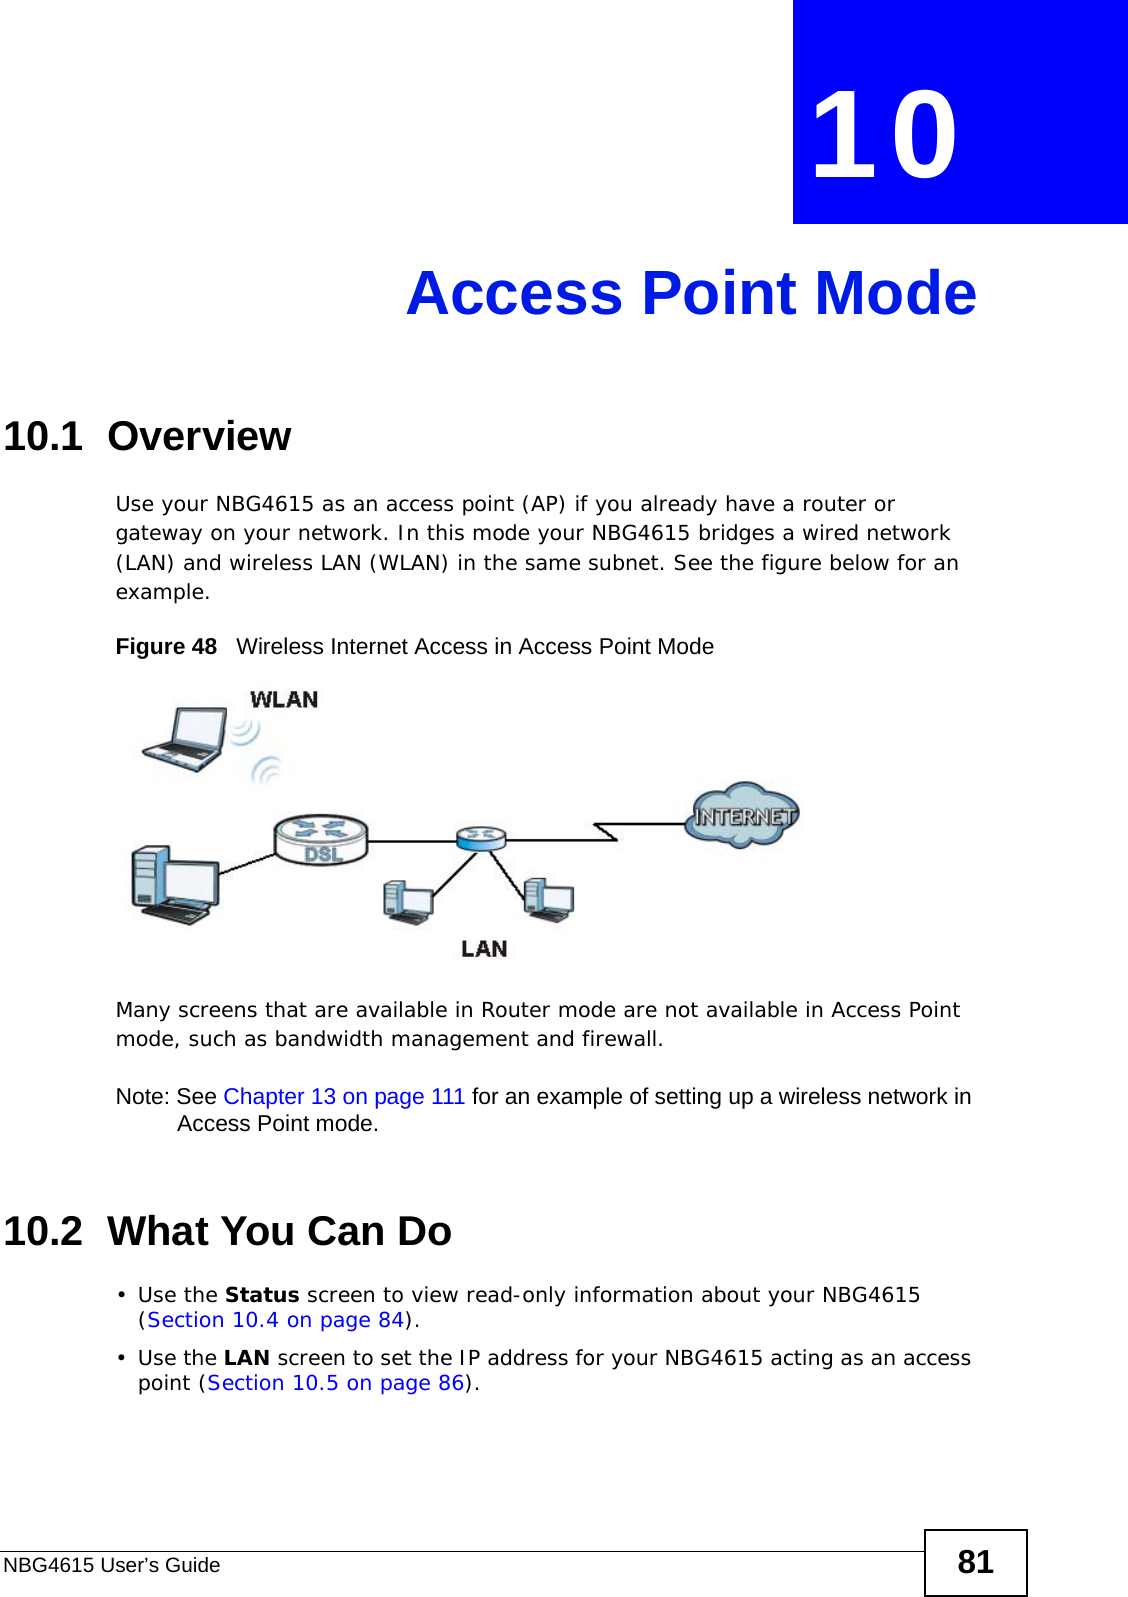 NBG4615 User’s Guide 81CHAPTER  10 Access Point Mode10.1  OverviewUse your NBG4615 as an access point (AP) if you already have a router or gateway on your network. In this mode your NBG4615 bridges a wired network (LAN) and wireless LAN (WLAN) in the same subnet. See the figure below for an example.Figure 48   Wireless Internet Access in Access Point Mode Many screens that are available in Router mode are not available in Access Point mode, such as bandwidth management and firewall.Note: See Chapter 13 on page 111 for an example of setting up a wireless network in Access Point mode. 10.2  What You Can Do•Use the Status screen to view read-only information about your NBG4615 (Section 10.4 on page 84).•Use the LAN screen to set the IP address for your NBG4615 acting as an access point (Section 10.5 on page 86).